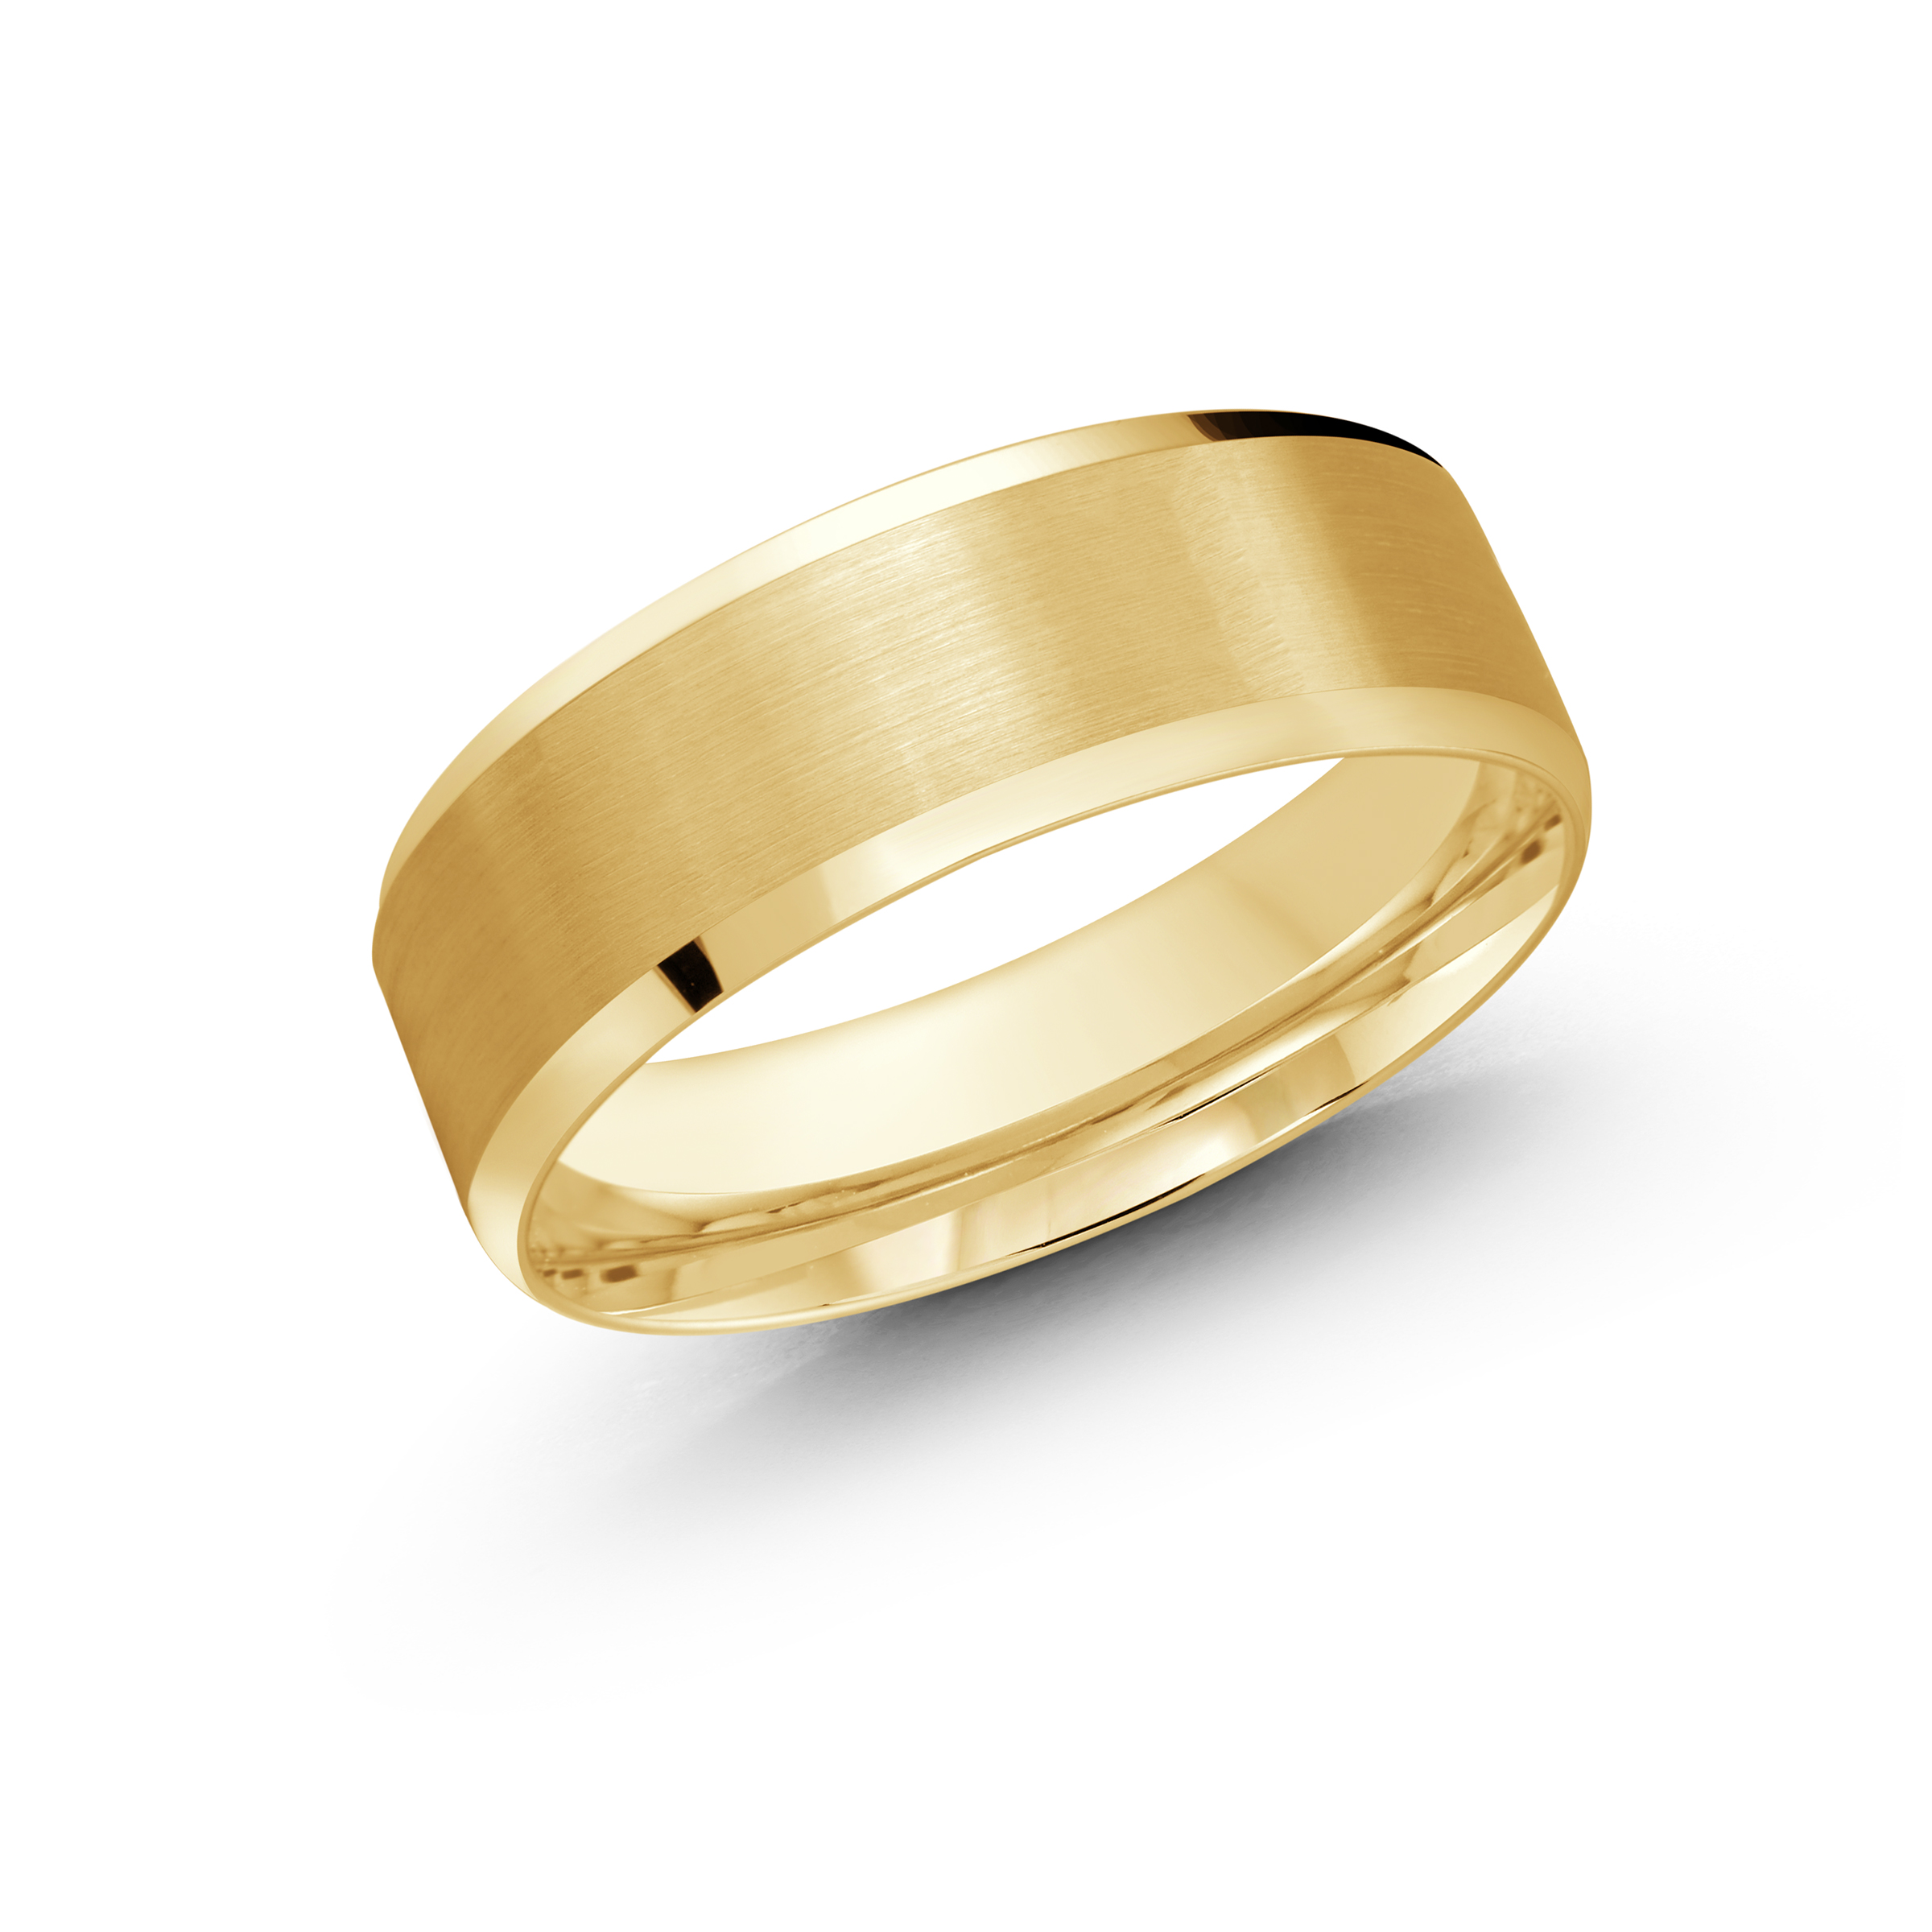 Yellow Gold Men's Ring Size 7mm (LUX-1105-7Y)